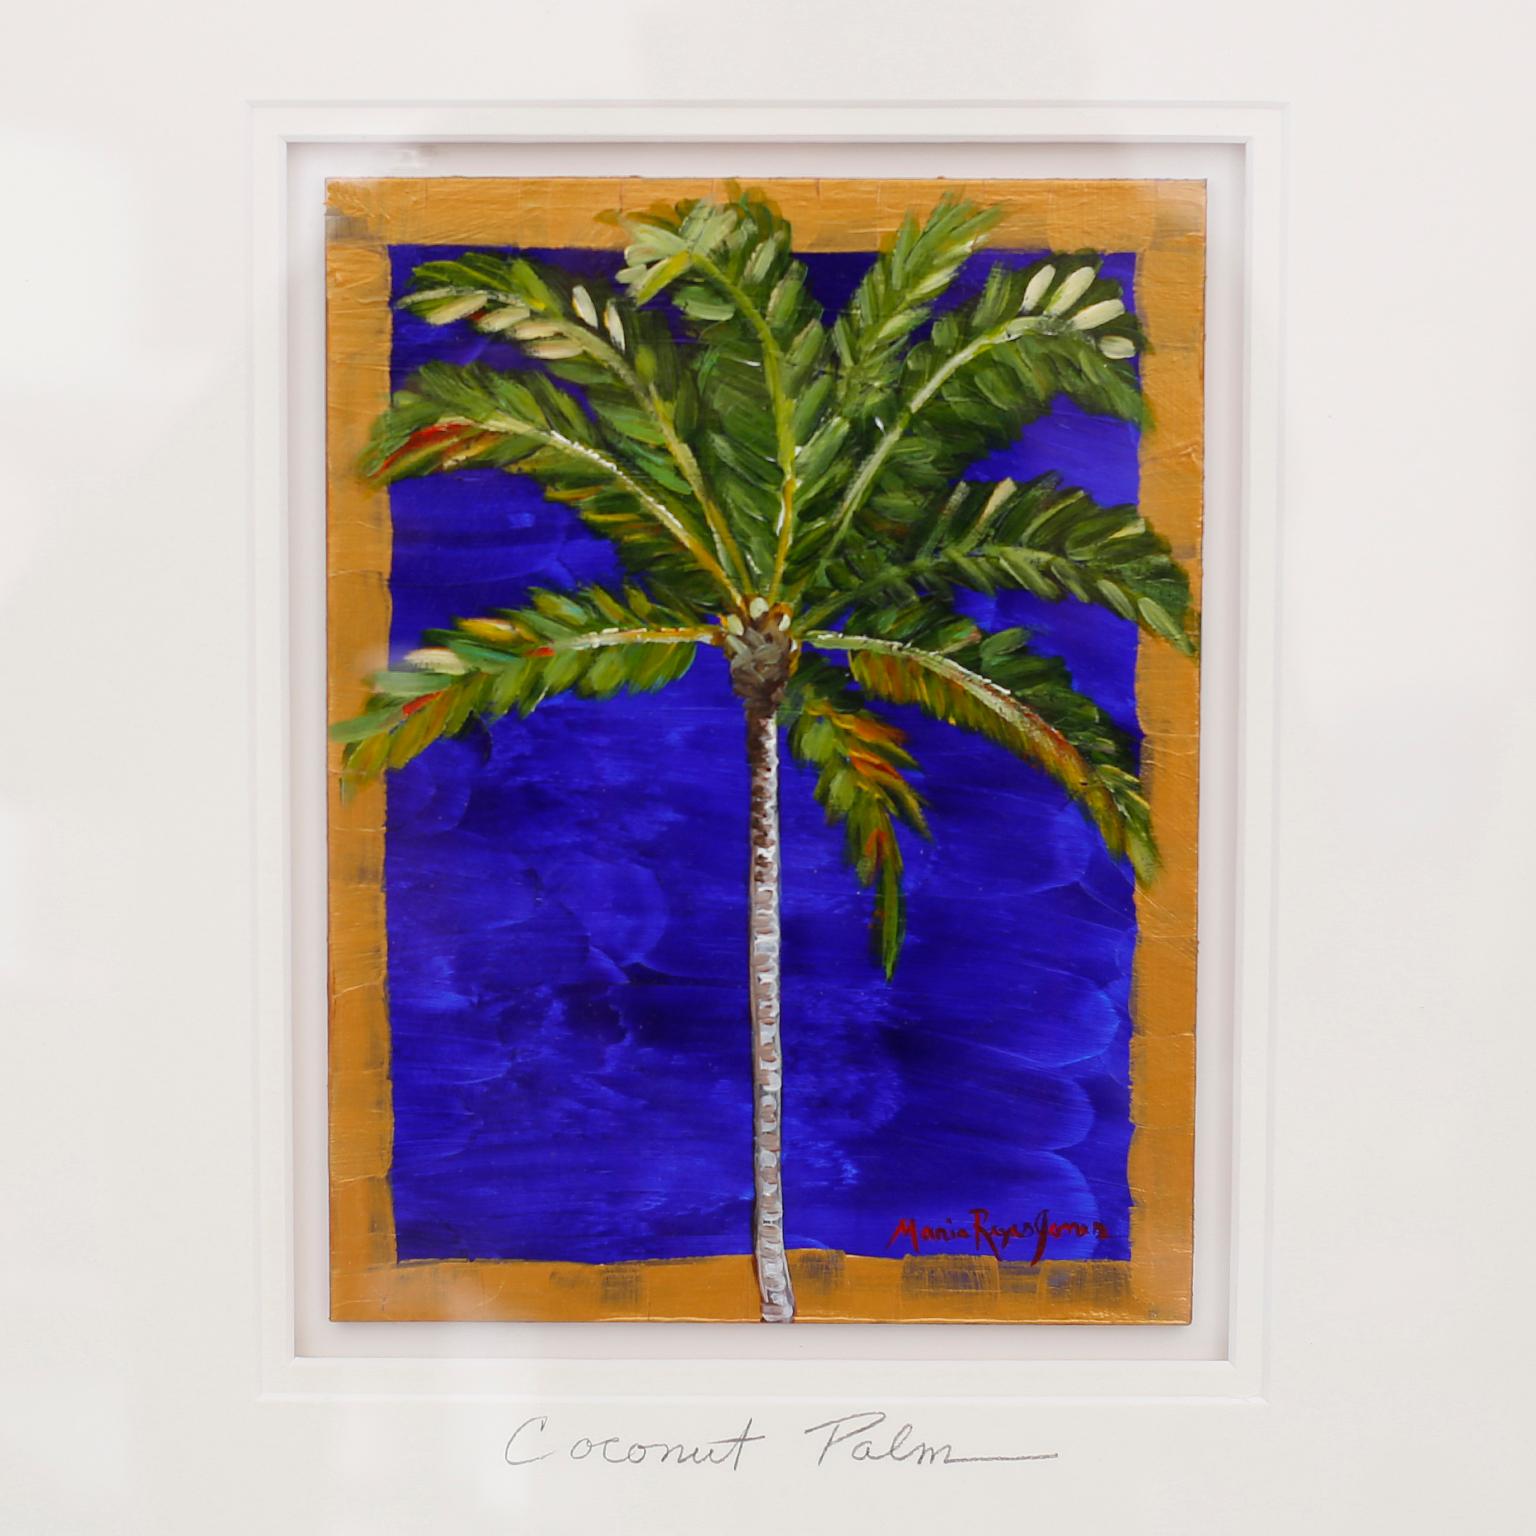 Striking acrylic painting on board of a coconut palm tree executed with a deep bold palette, signed by the noted artist Maria Reyes Jones. Presented under glass in a museum quality gold leaf wood frame.